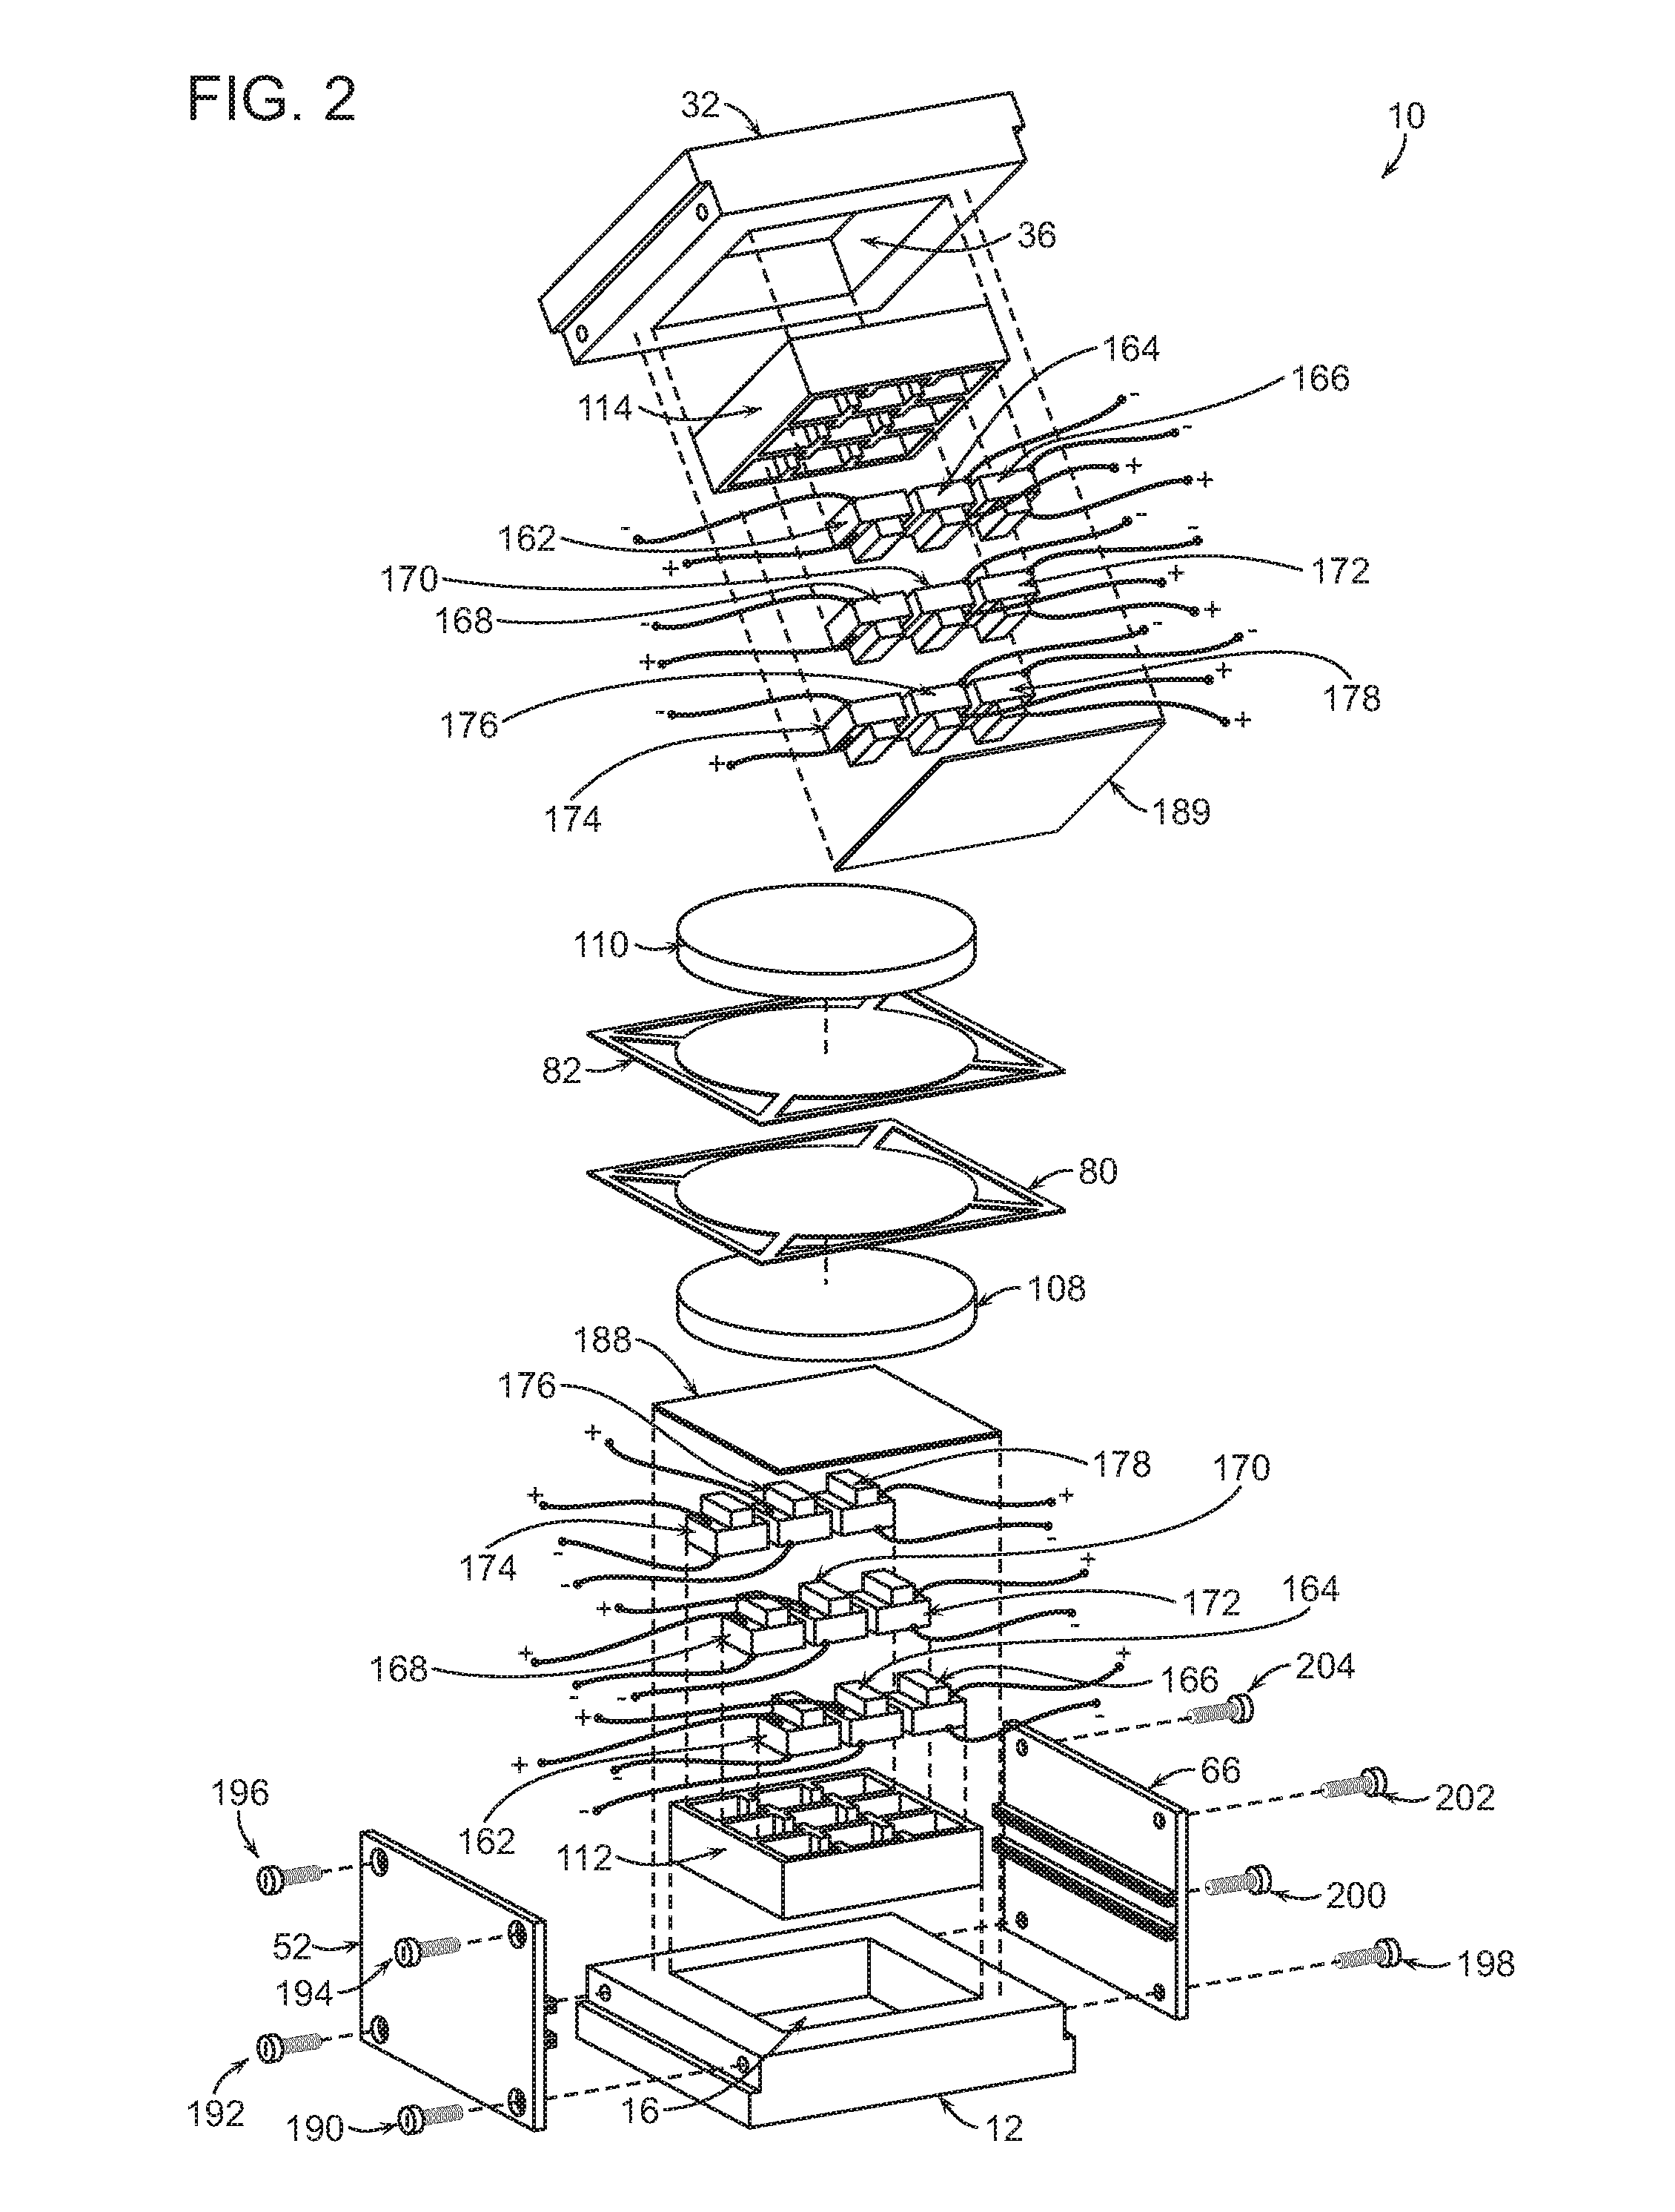 Device and method for harvesting energy